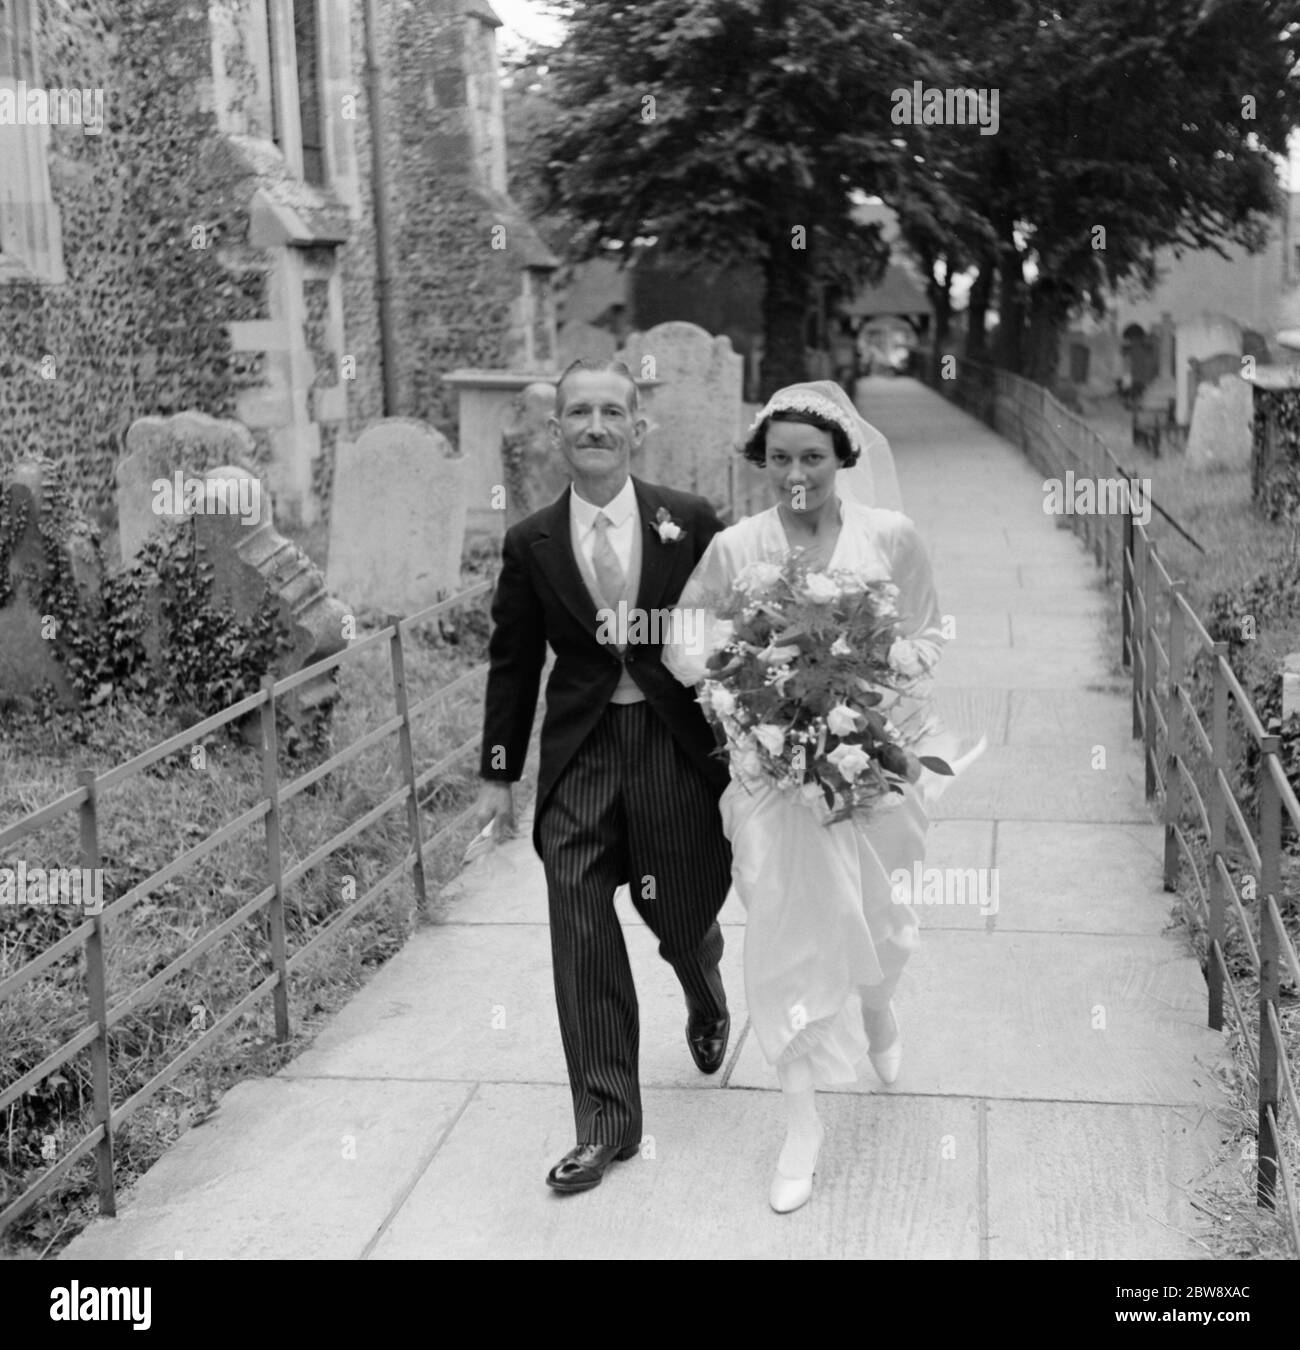 The wedding of Haken and Taylor . The bride being walked by an unknown person . 1936 Stock Photo